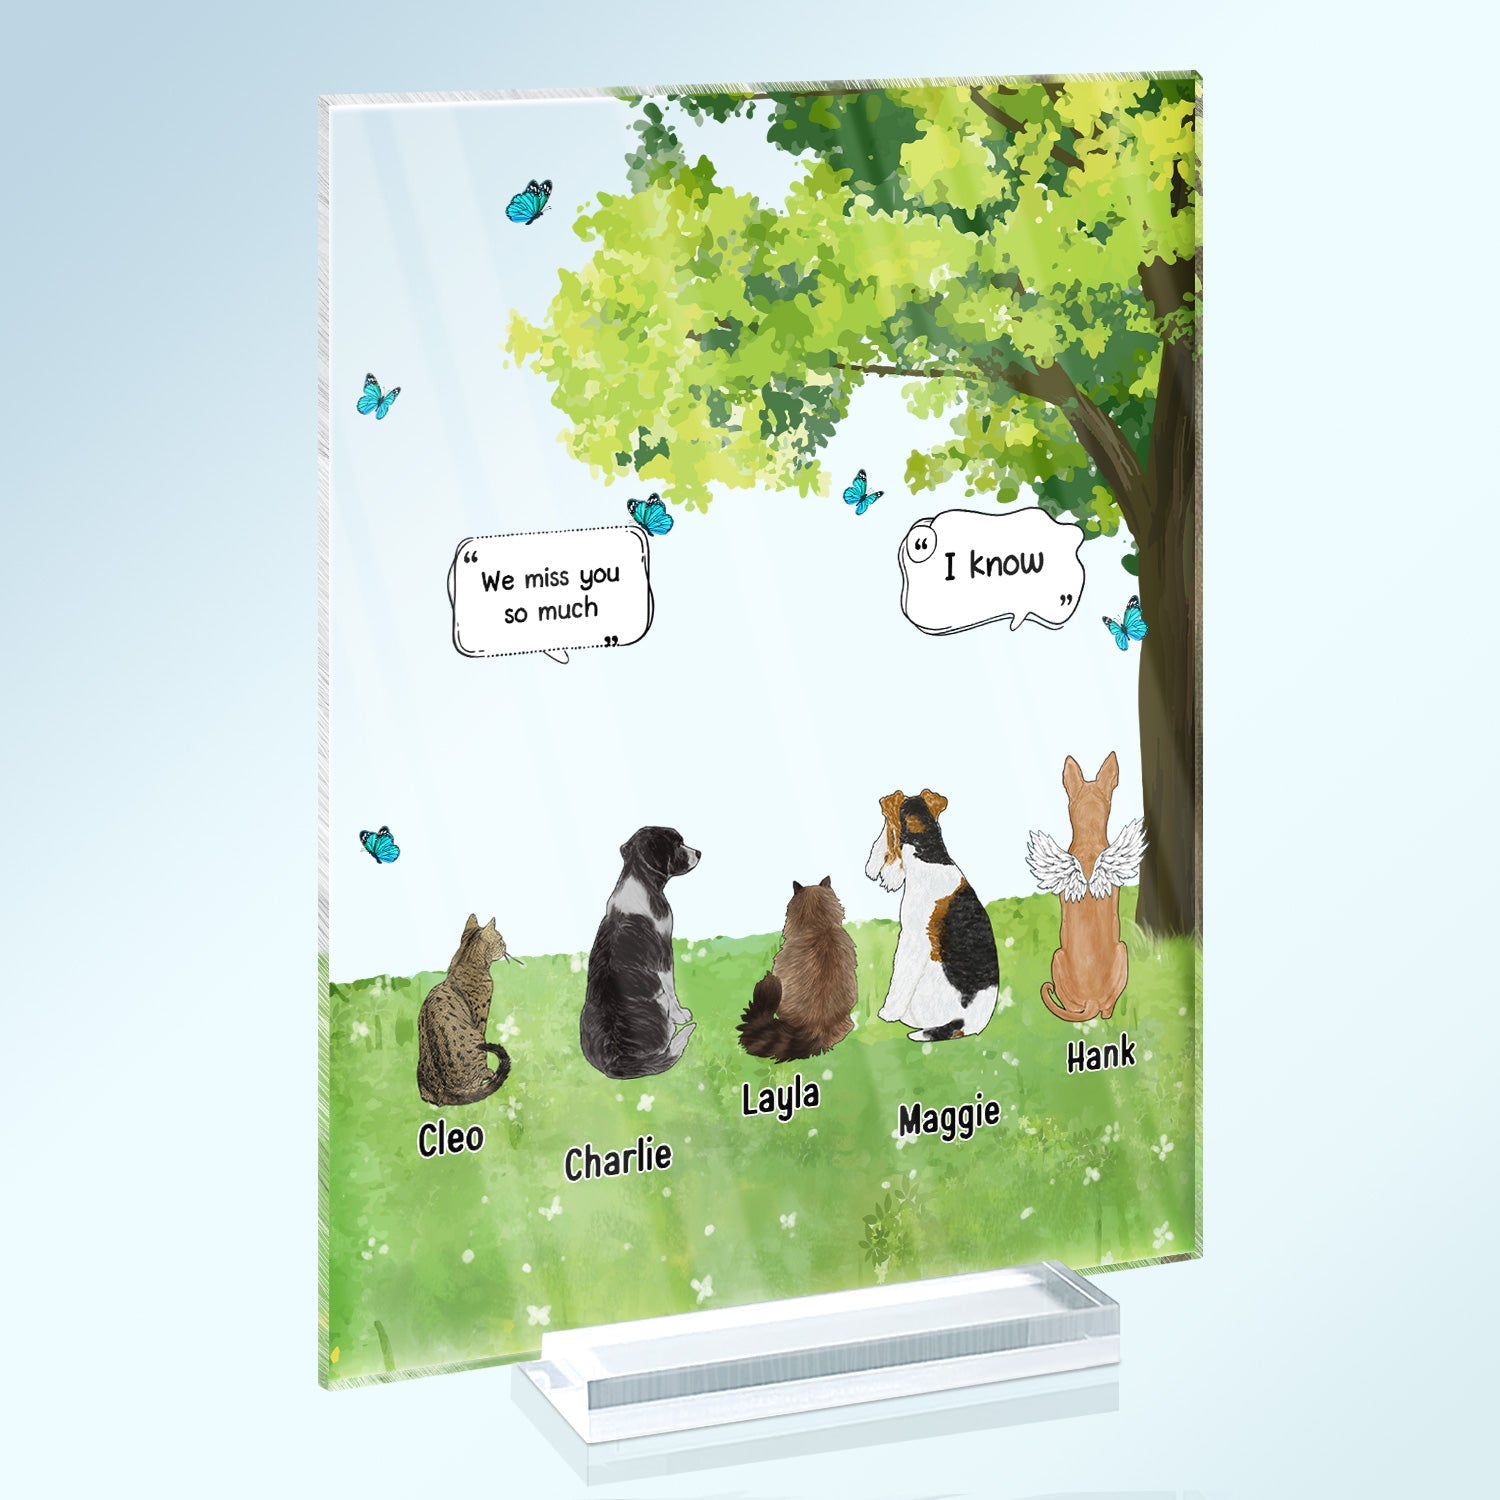 They Still Talk About You Grass - Memorial Gift For Pet Lovers - Personalized Vertical Rectangle Acrylic Plaque